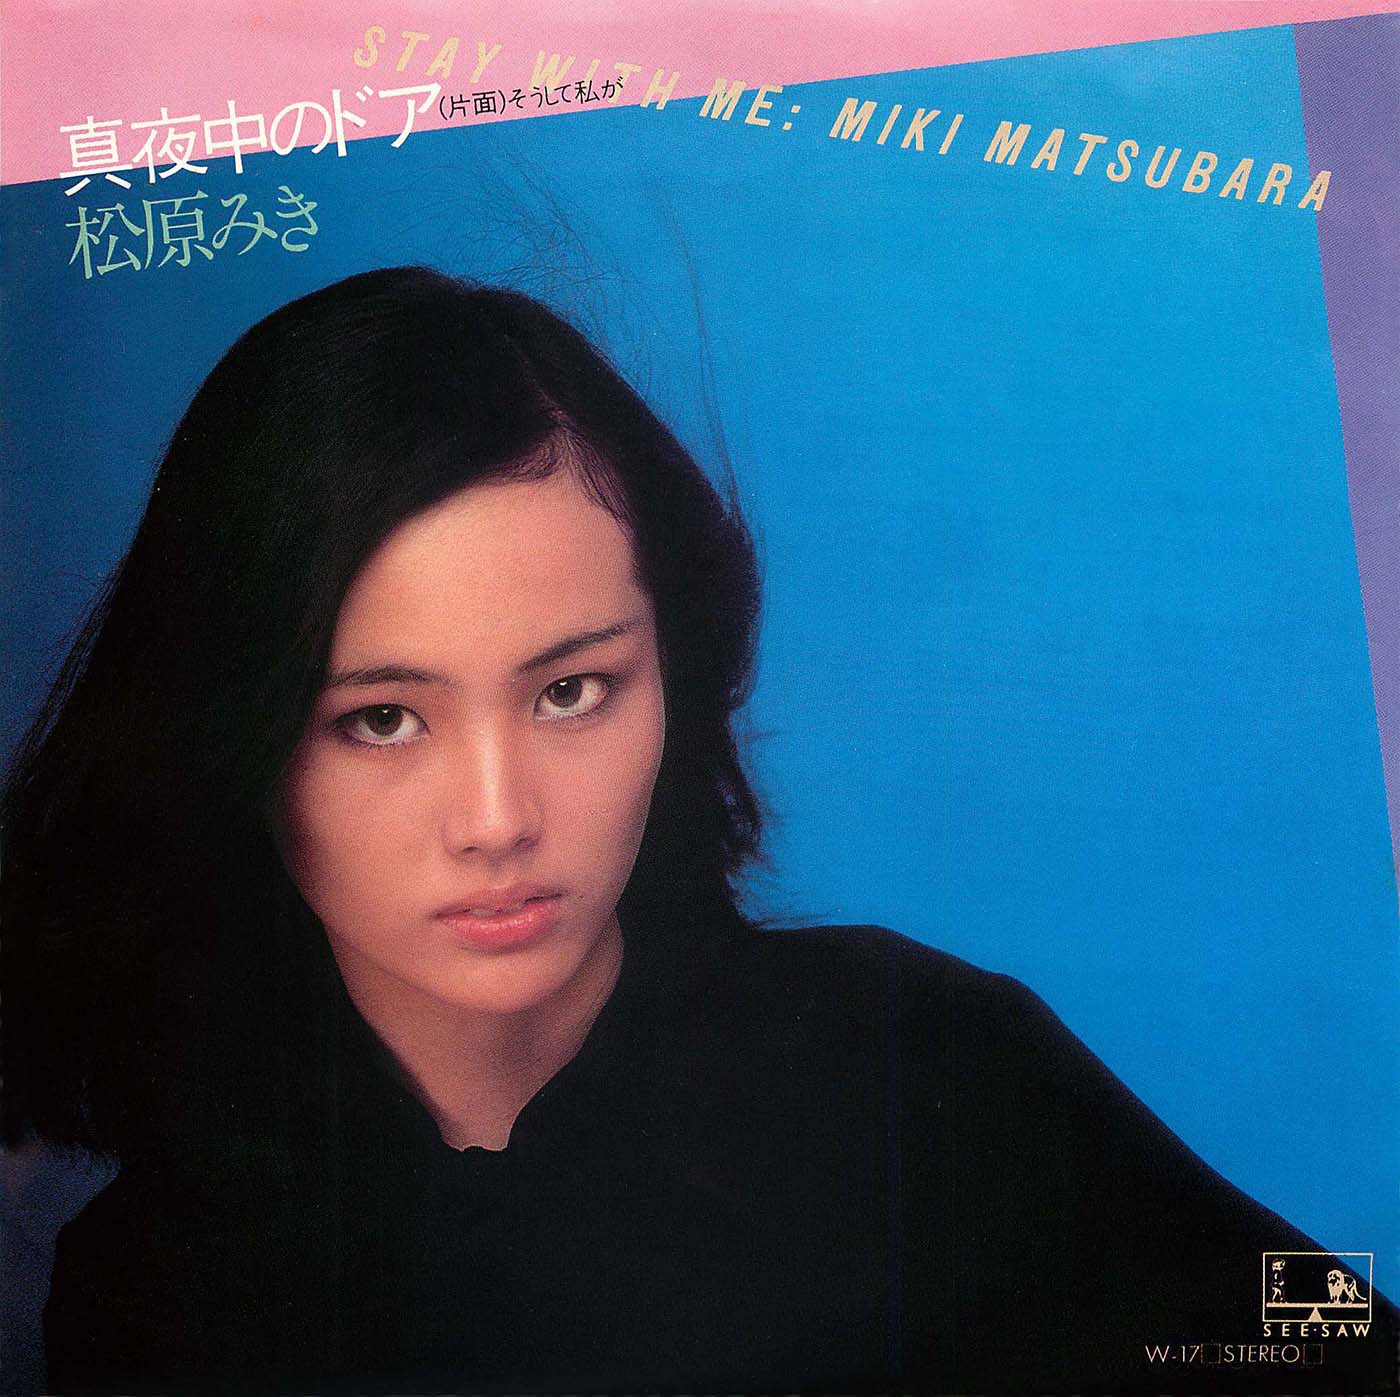 Reissued Vinyl of ‘Mayonaka no Door/Stay With Me‘ by Miki Matsubara, is now available to purchase worldwide!